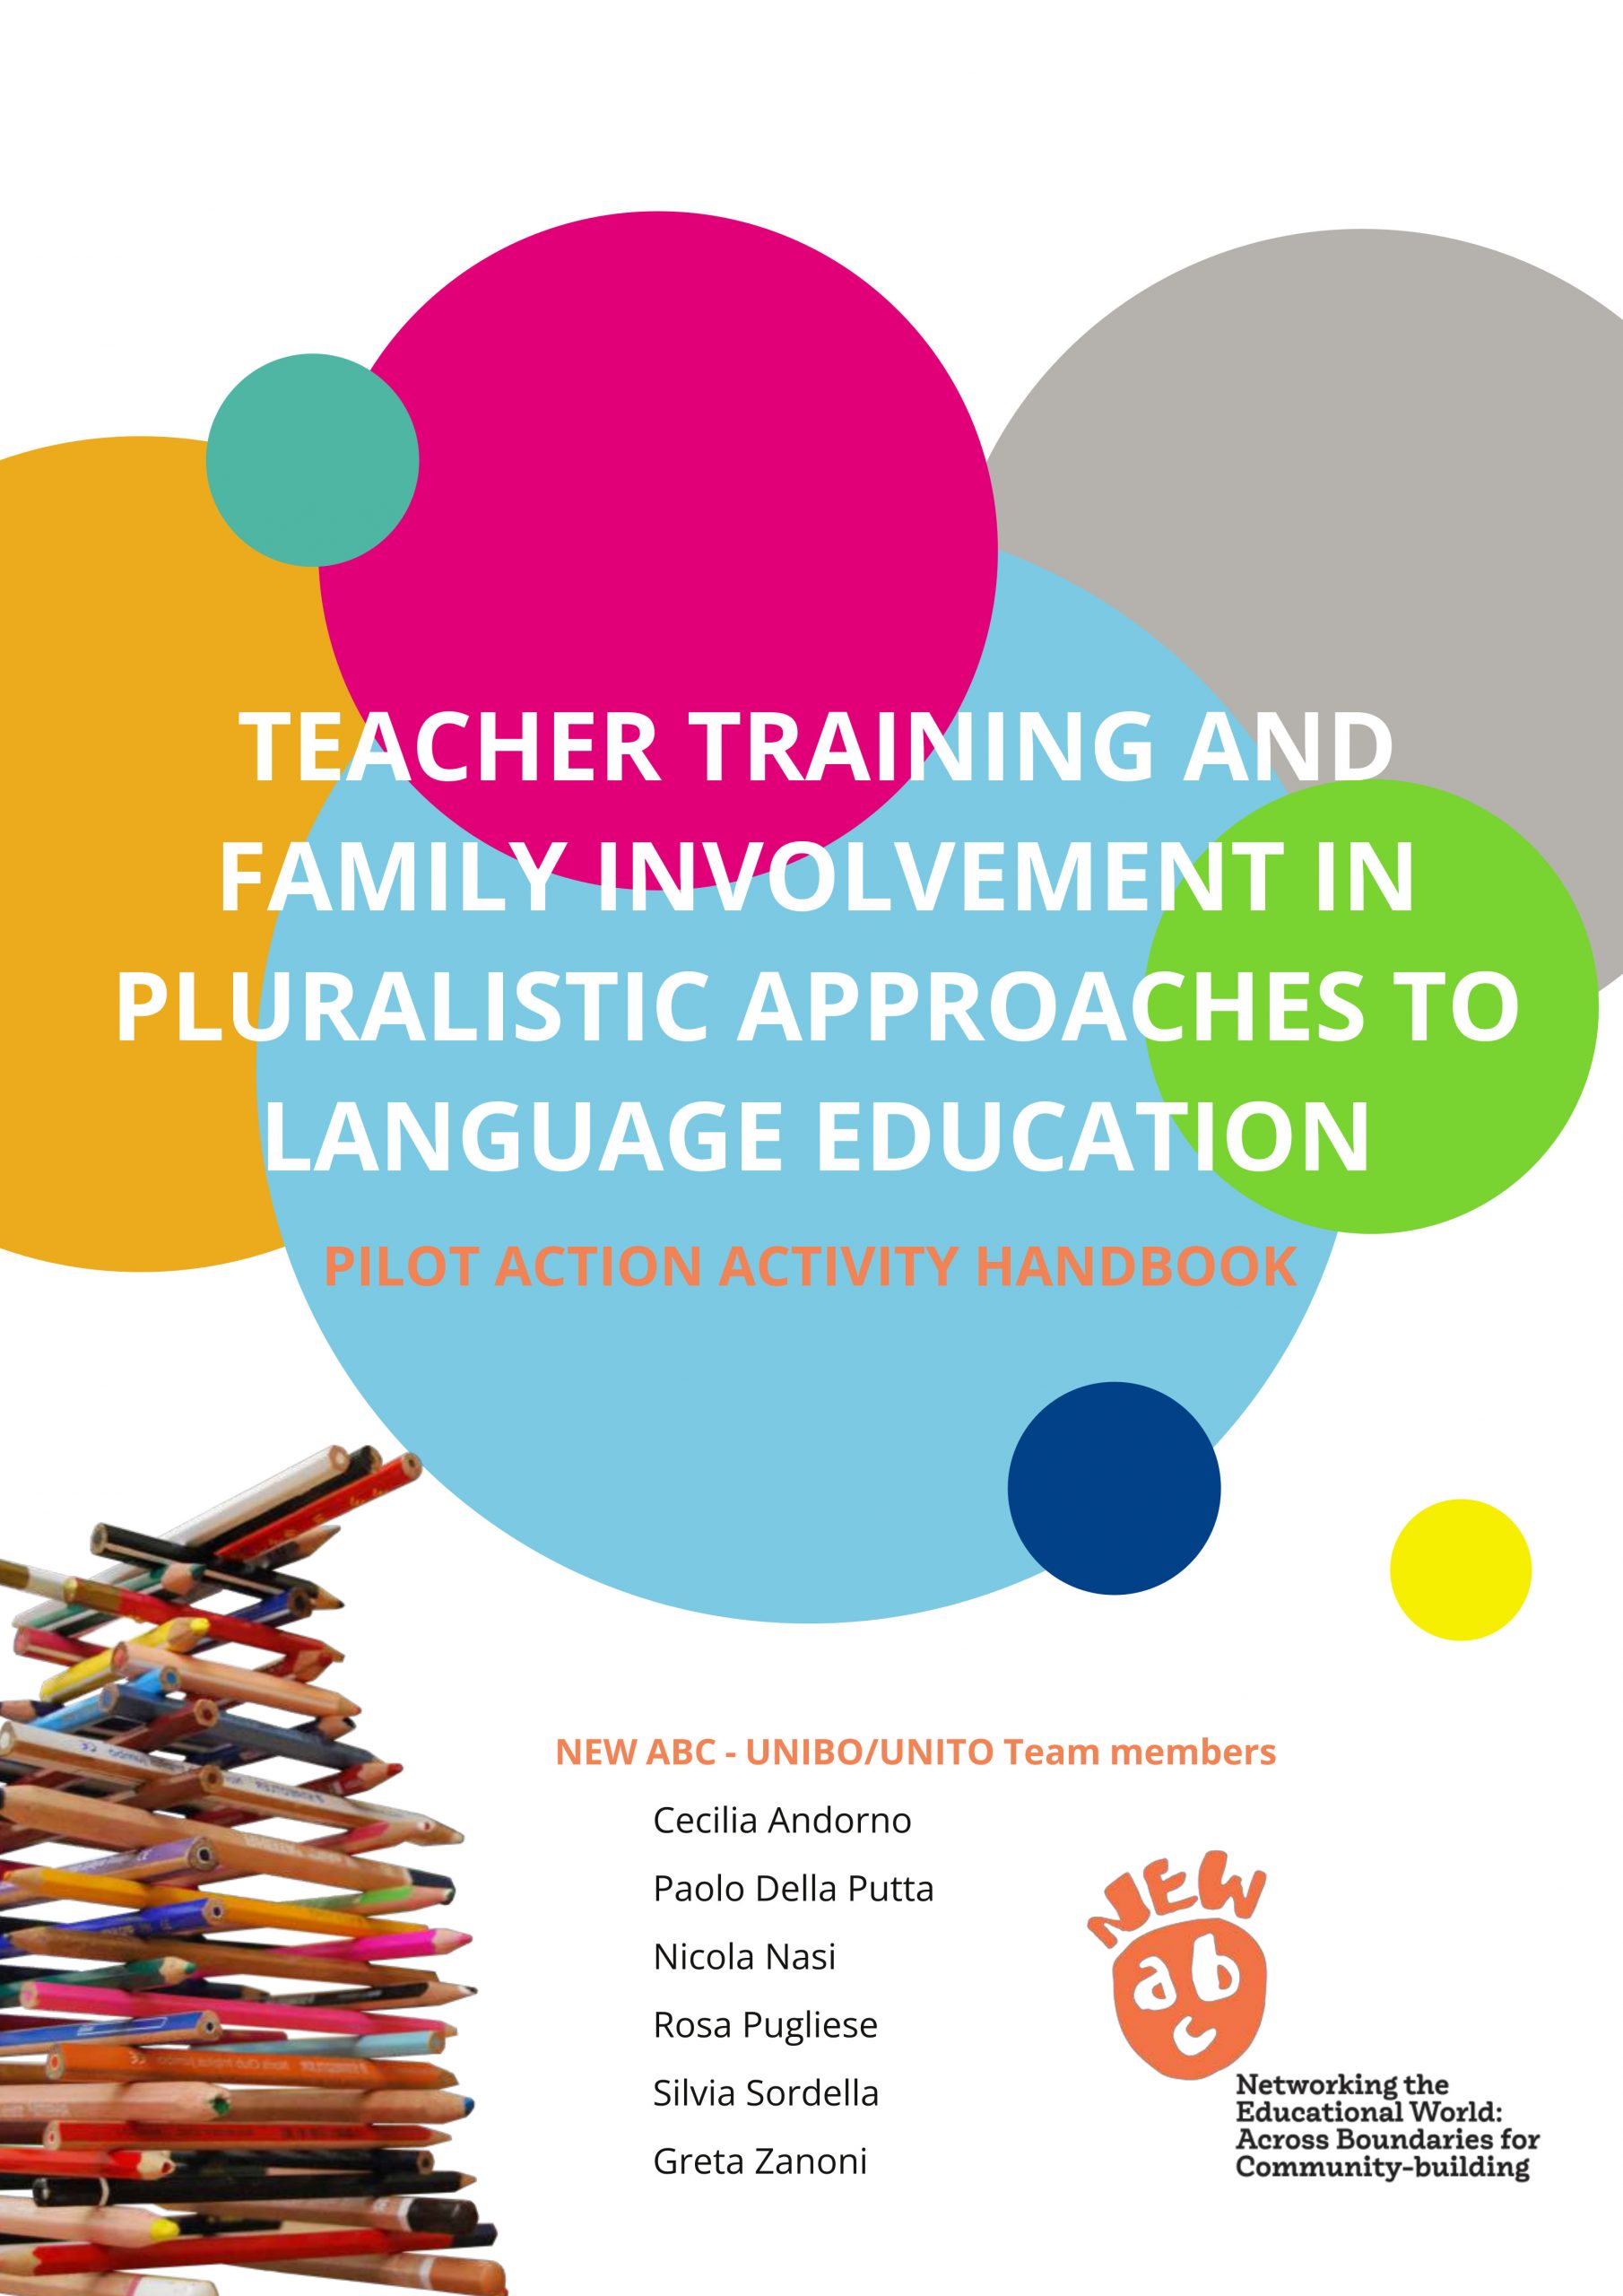 Teacher training and family involvement in pluralistic approaches to language education